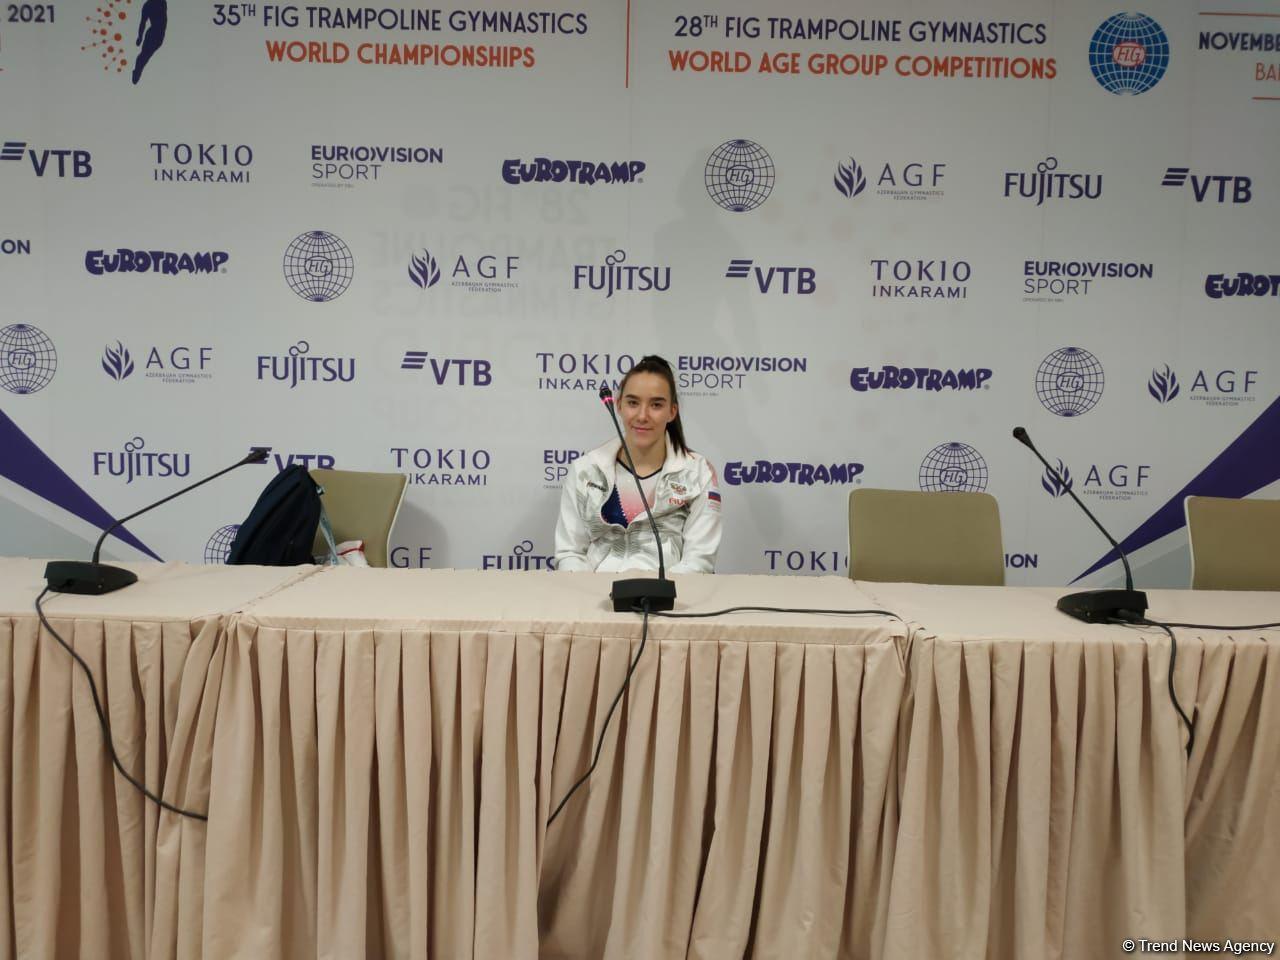 Coach set goal to enter top three in individual trampoline jumping - Russian gymnast